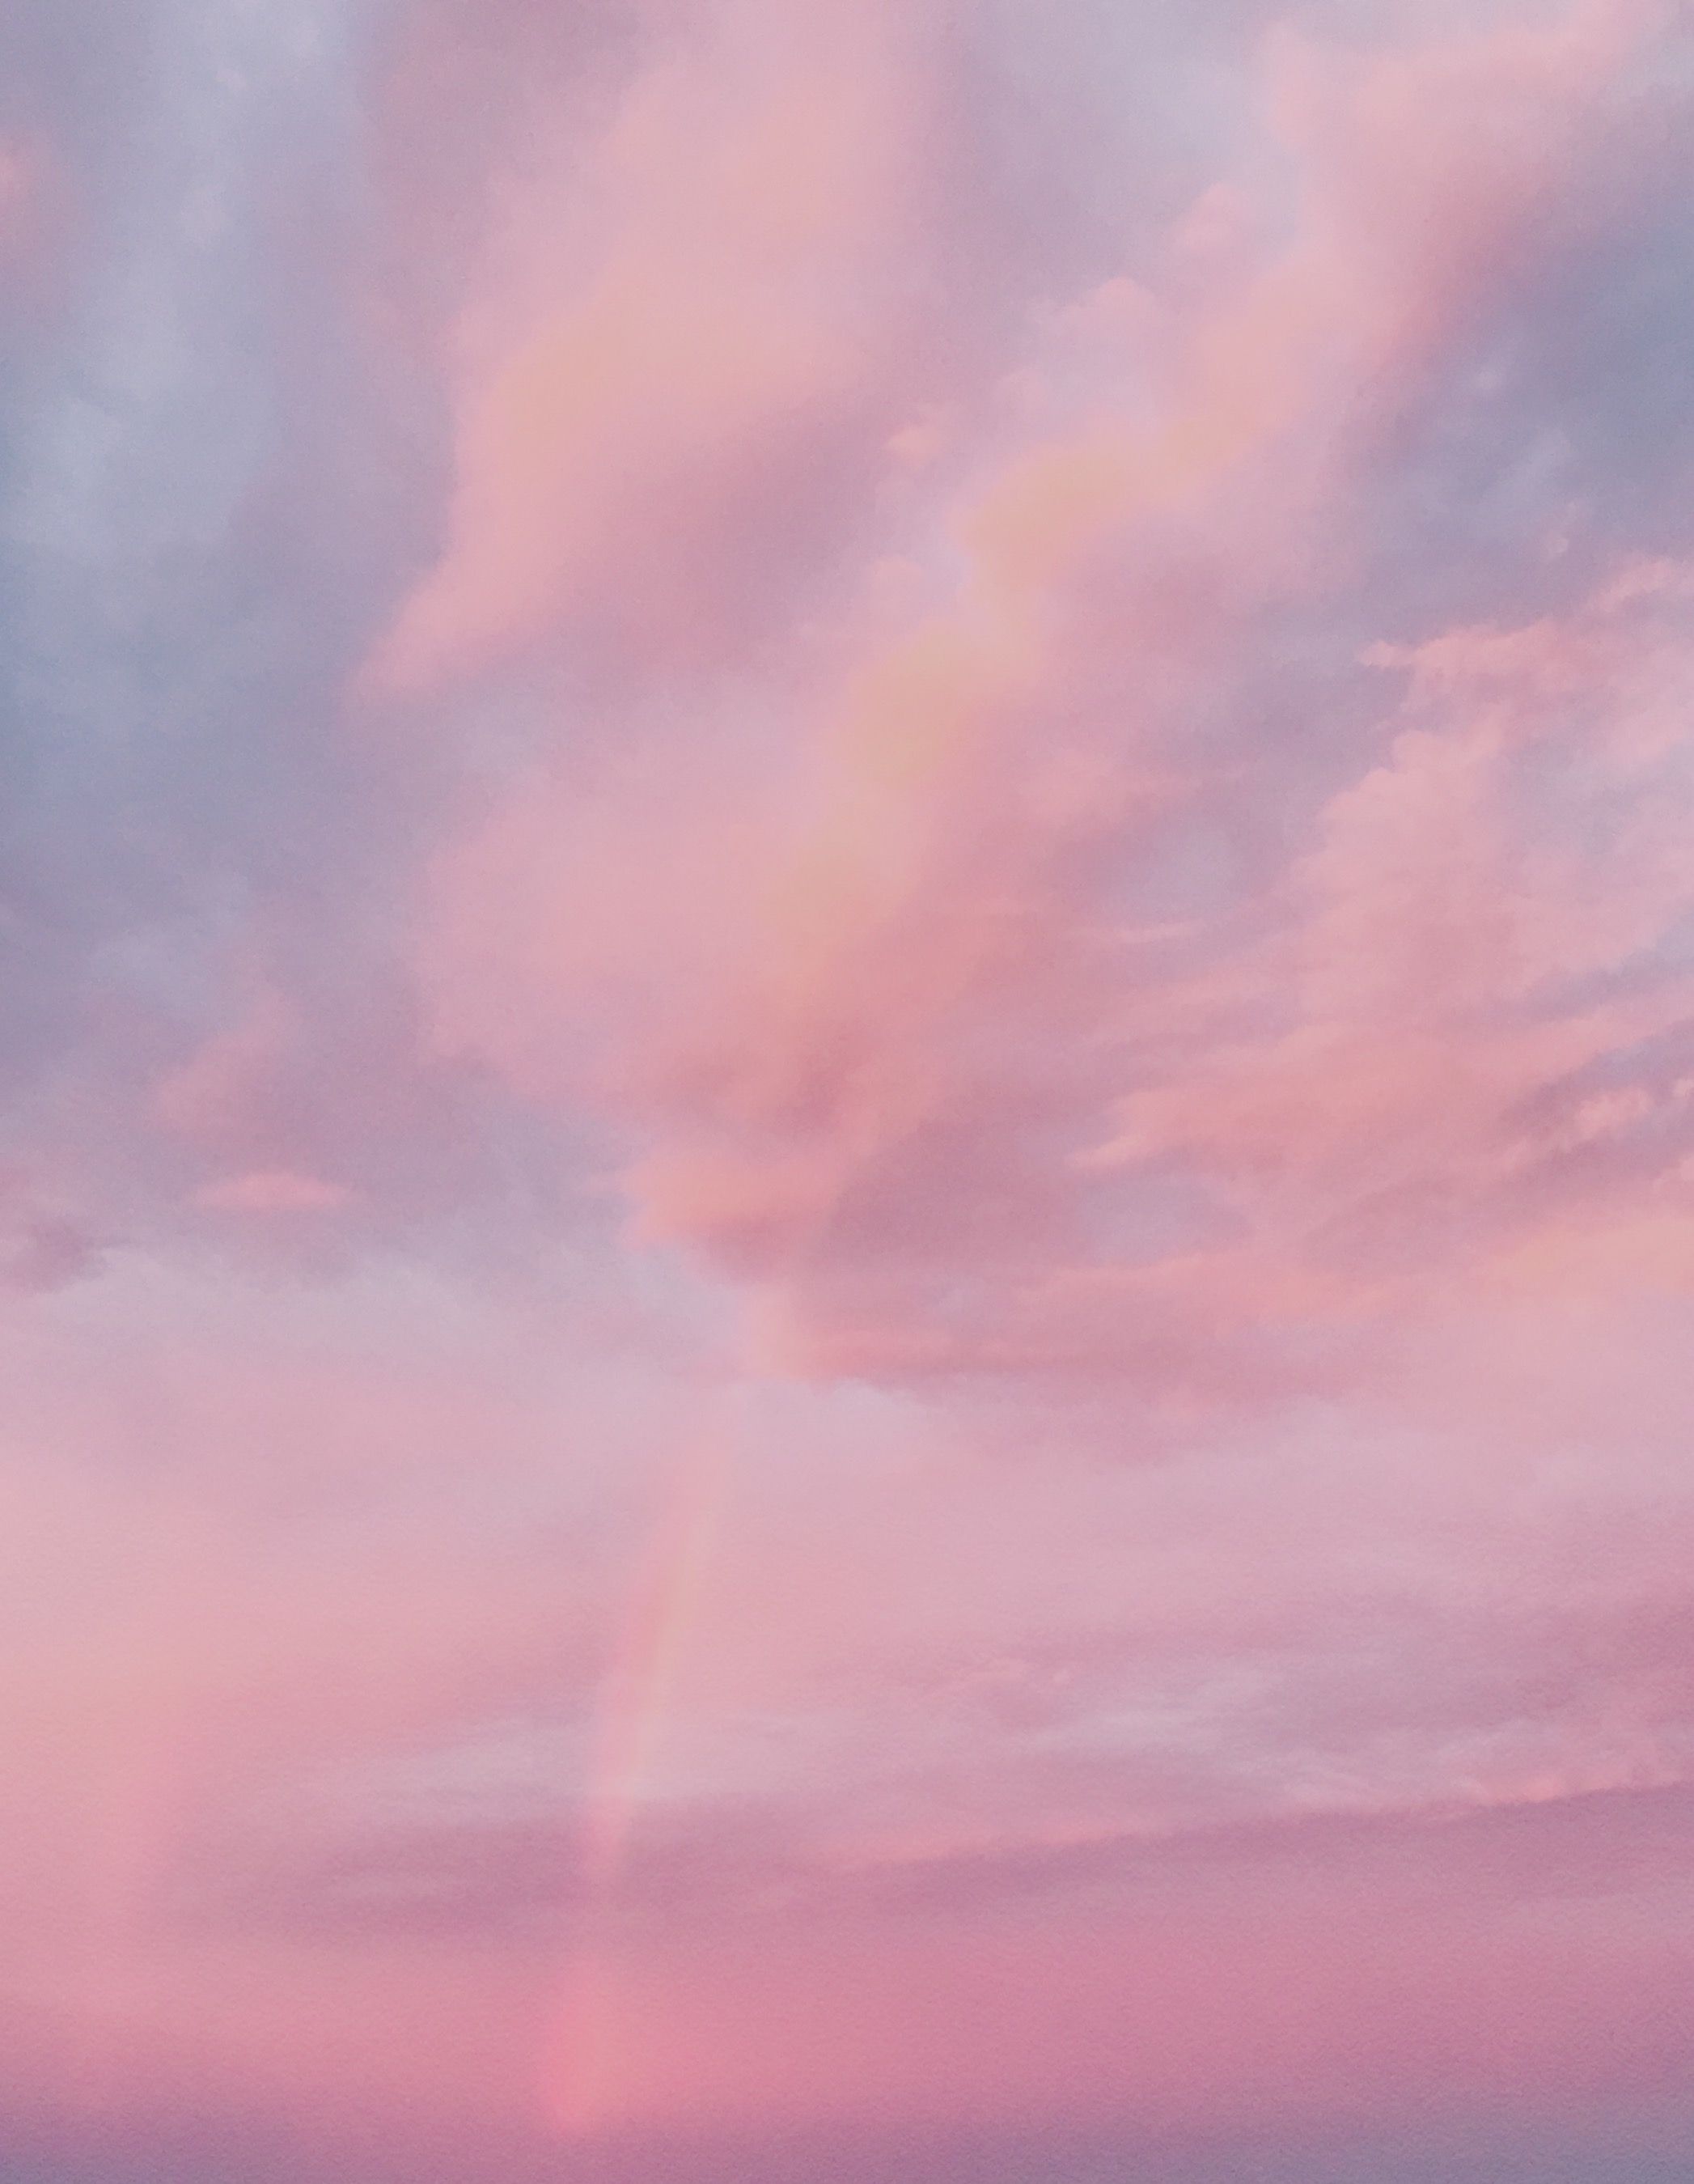 Pink Sky Aesthetic Wallpaper Free Pink Sky Aesthetic Background